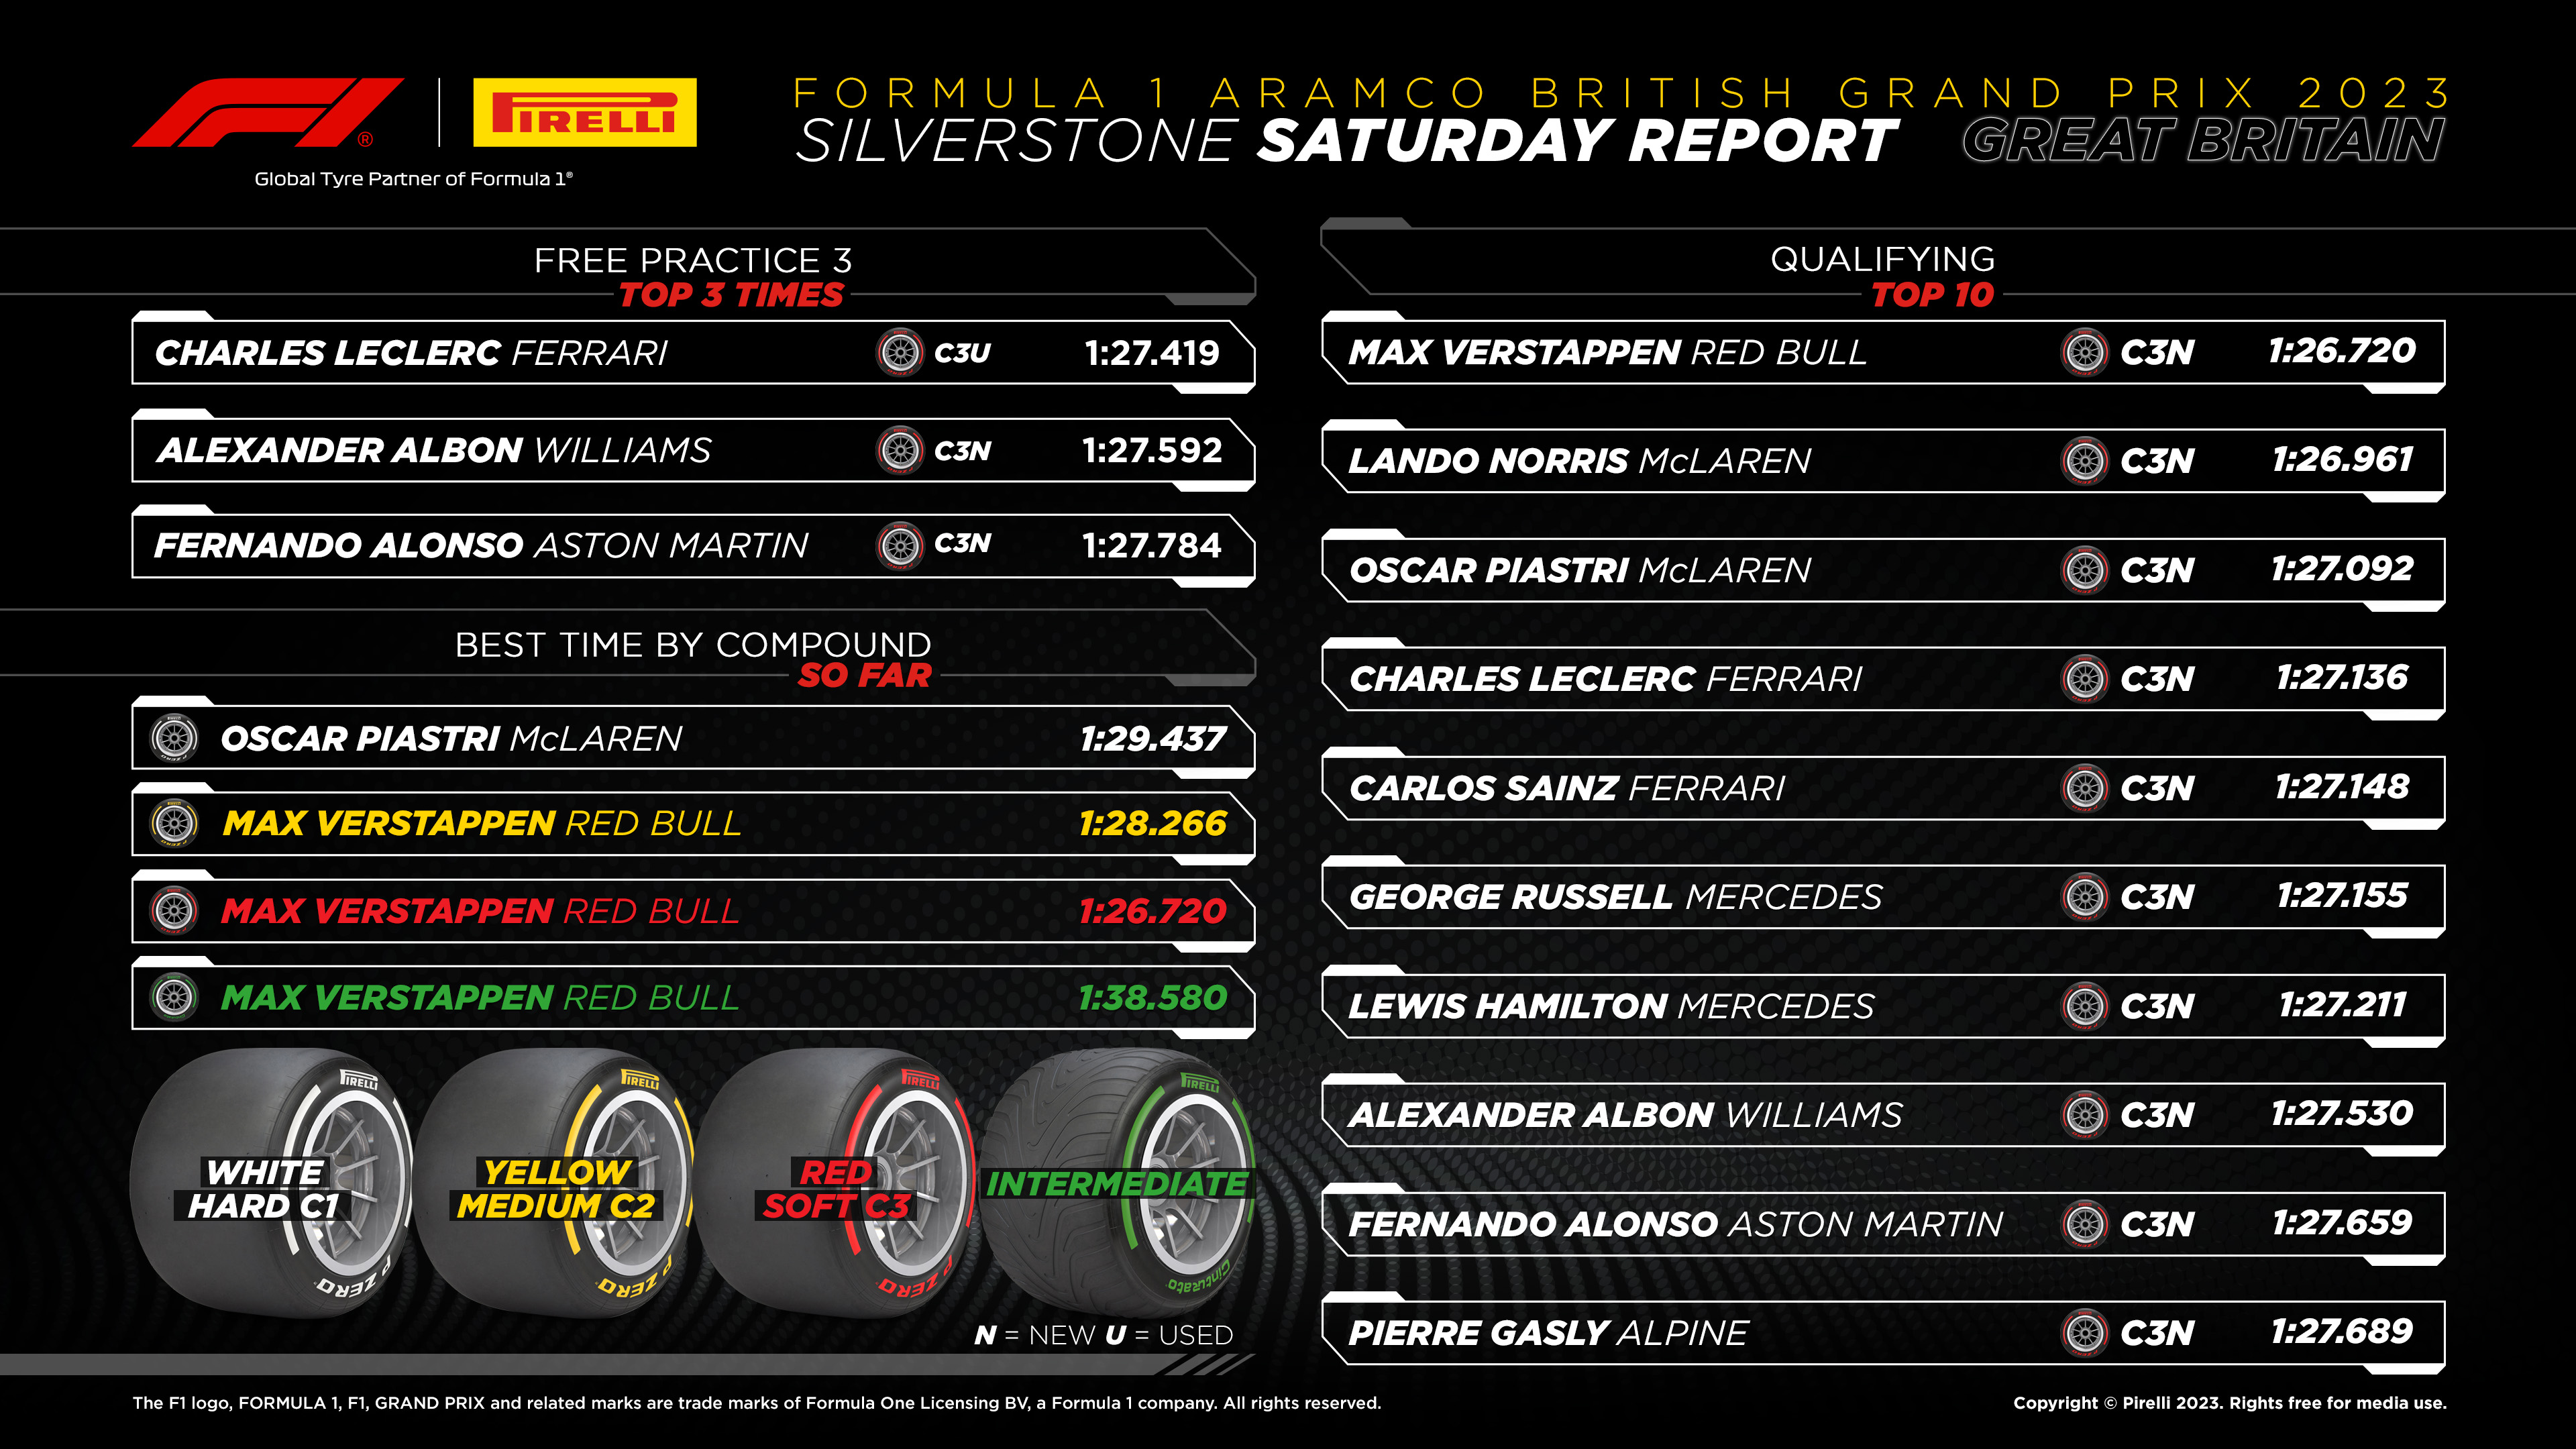 Saturday Report for the Formula 1 Aramco British Grand Prix 2023. FP3 Top 3 Times: Leclerc, Ferrari, 1:27.419 on Soft C3 Used; Albon, Williams, 1:27.592 on Soft C3 New; Alonso, Aston Martin, 1:27.784 on Soft C3 New. Qualifying Best Times: Verstappen, Red Bull, 1:26.720 on Soft C3 New; Norris, McLaren, 1:26.961 on C3 New; Piastri, McLaren, 1:27.092 on Soft C3 New; Leclerc, Ferrari, 1:27.136 on Soft C3 New; Sainz, Ferrari, 1:27.418 on Soft C3 New. Best time by compound so far: Hard C1, Piastri, McLaren, 1:29.437; Medium C2, Verstappen, Red Bull, 1:28.266; Soft C3, Verstappen, Red Bull, 1:26.720; Intermediate, Verstappen, Red Bull, 1:38.580